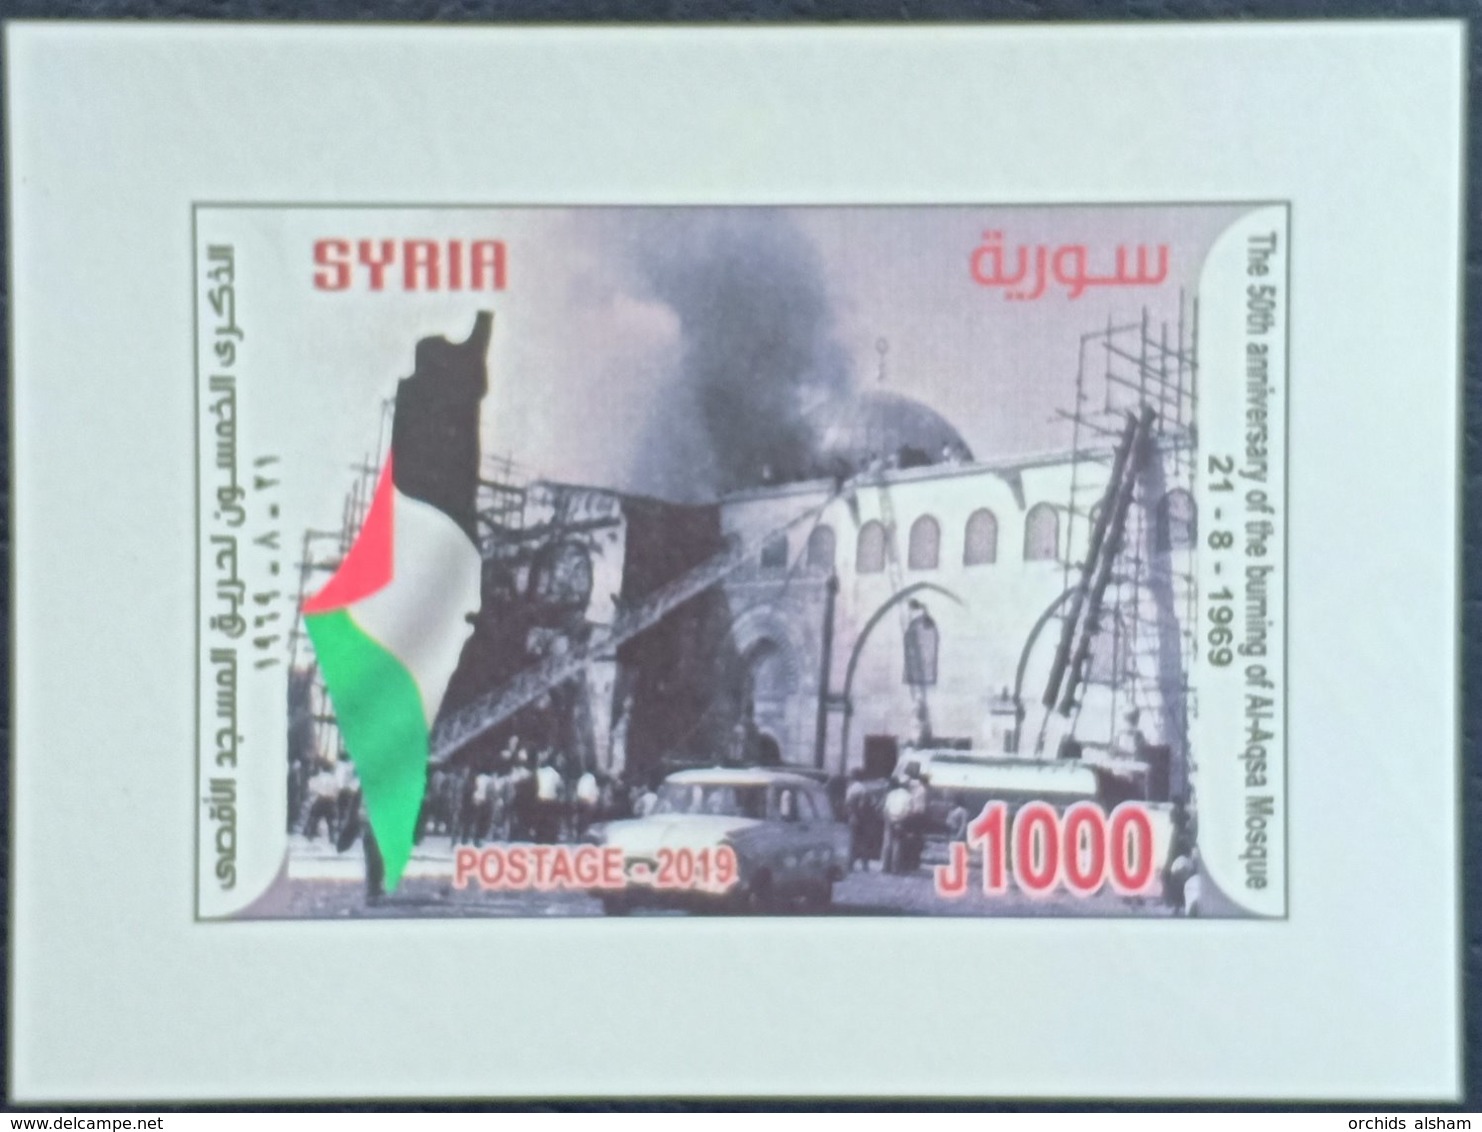 Syria 2019 NEW MNH Block - Al-Quds Jerusalem 50th Anniv Of The Burning Of Al-Aqsa Mosque In Palestine - Only 1000 Issued - Syria